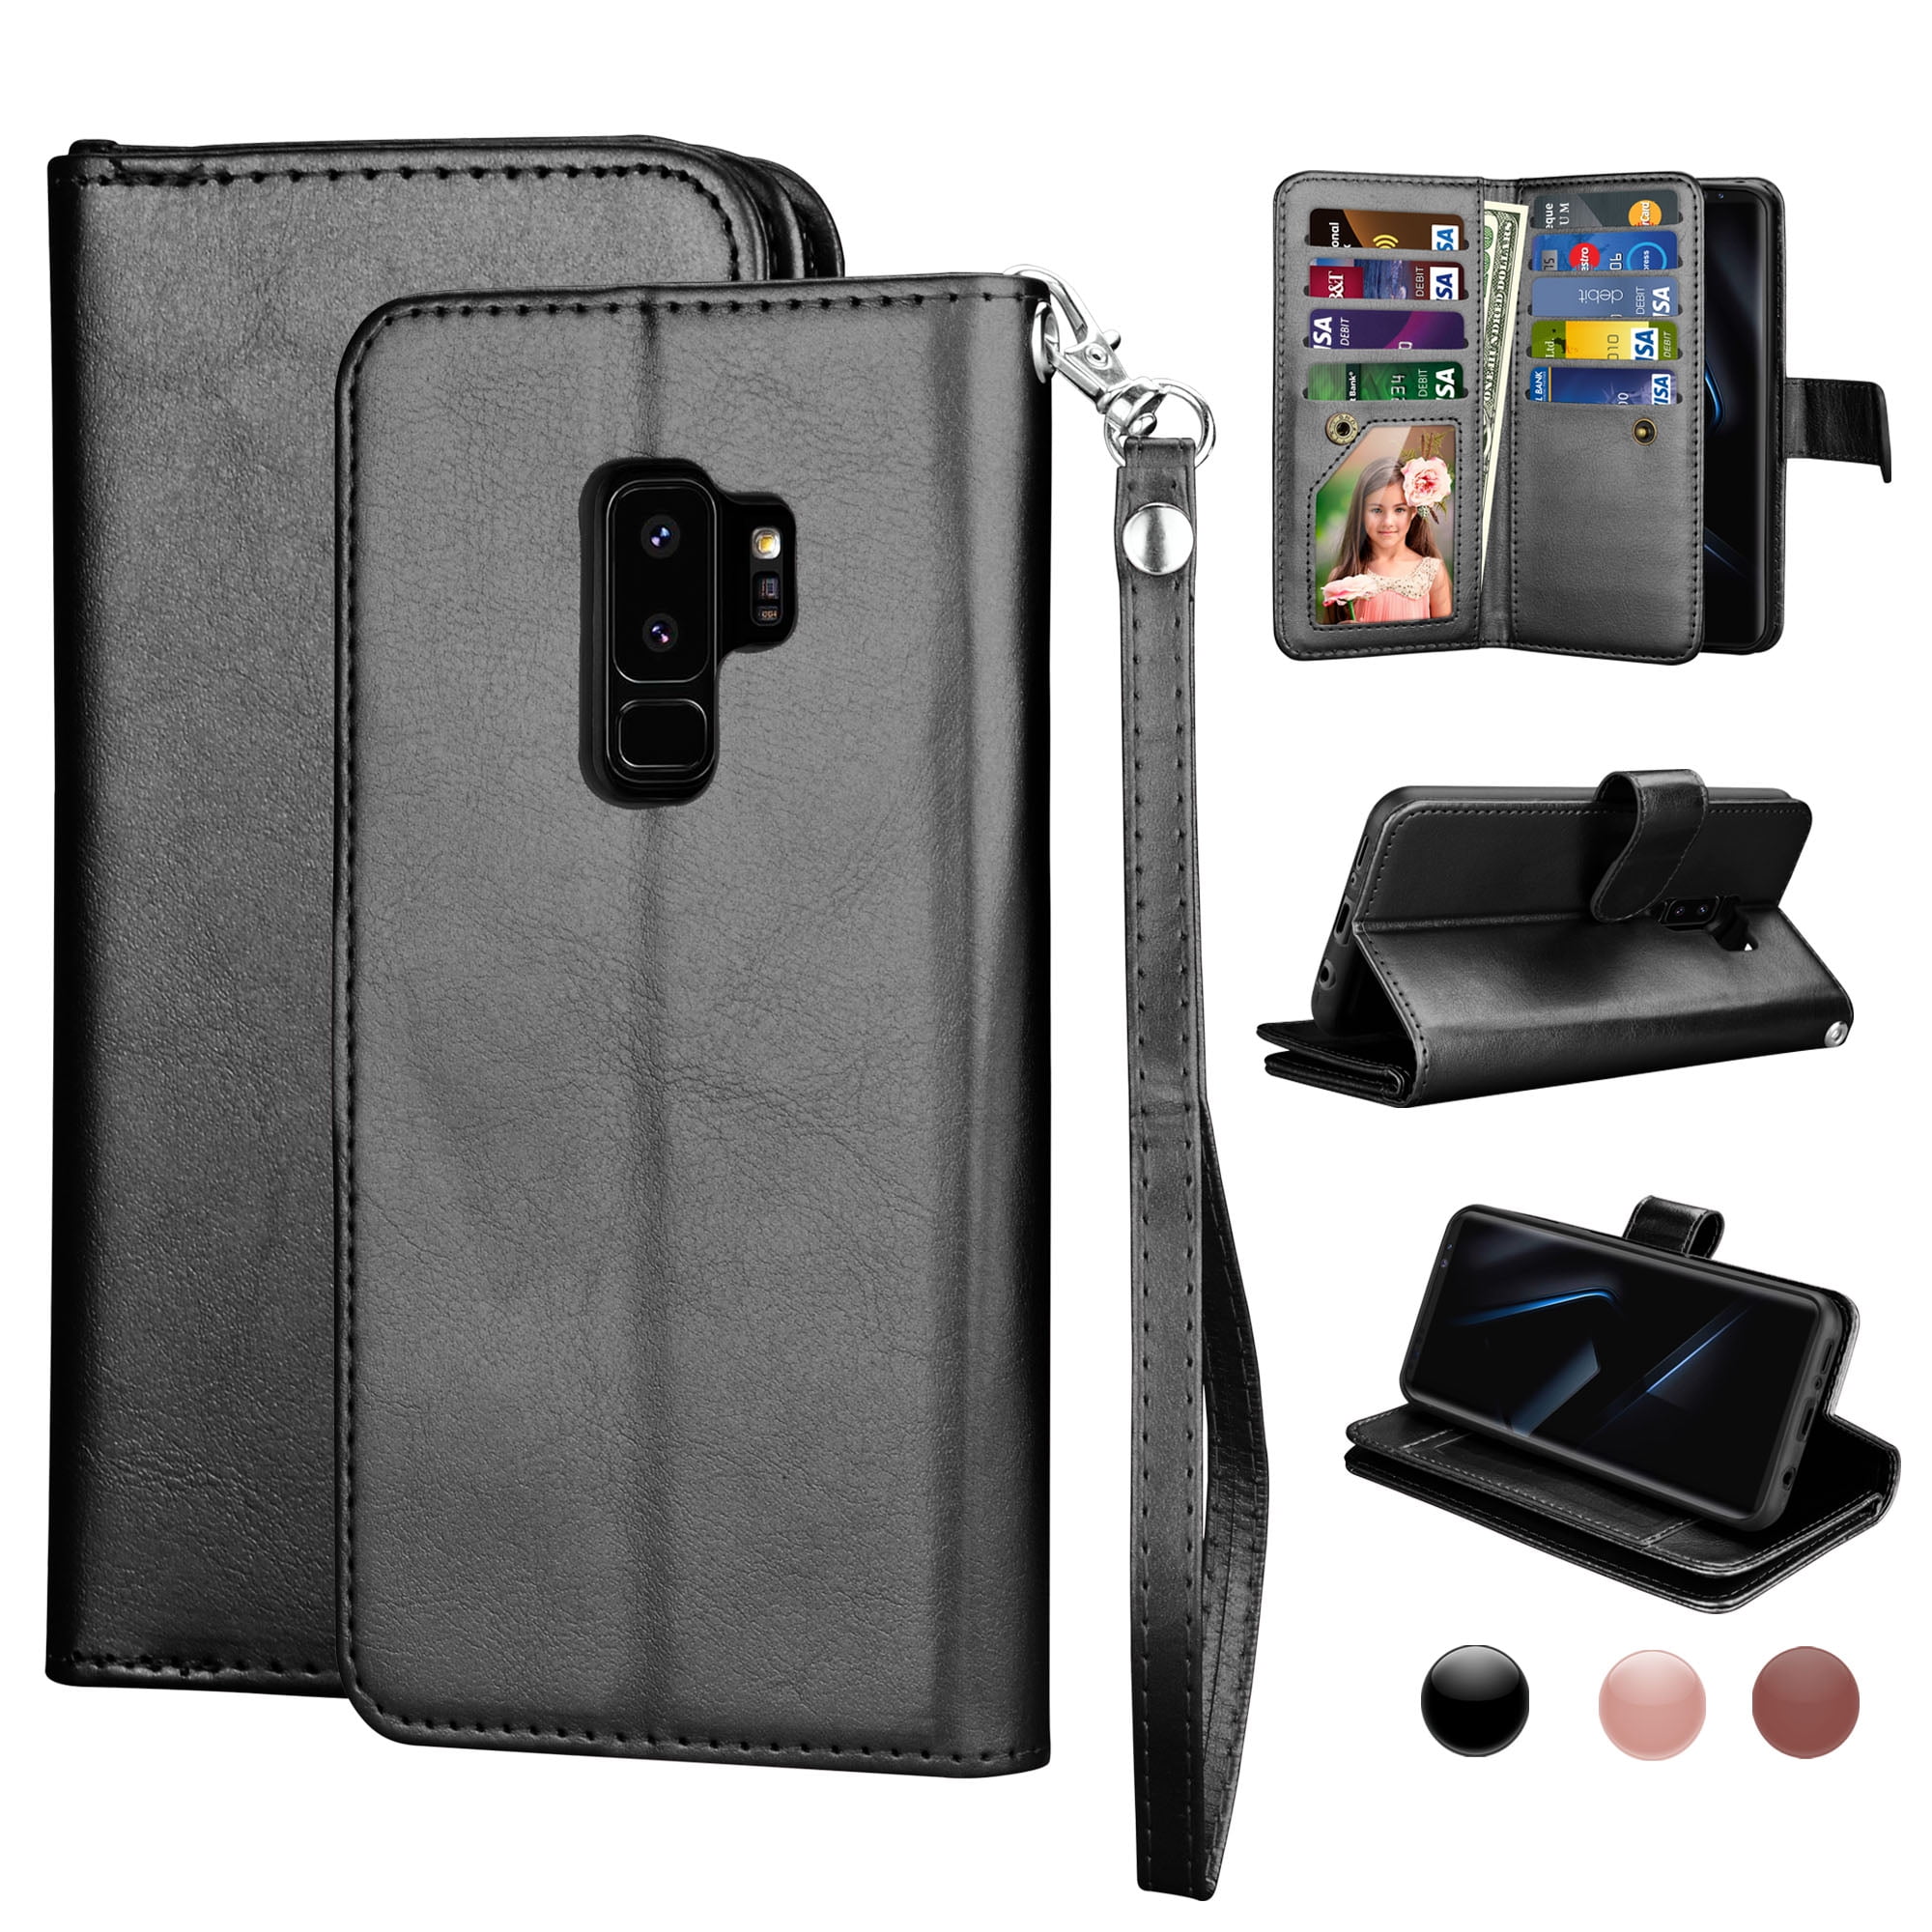 Brown Leather Flip Case Wallet for Samsung Galaxy S10 Plus Stylish Cover Compatible with Samsung Galaxy S10 Plus 